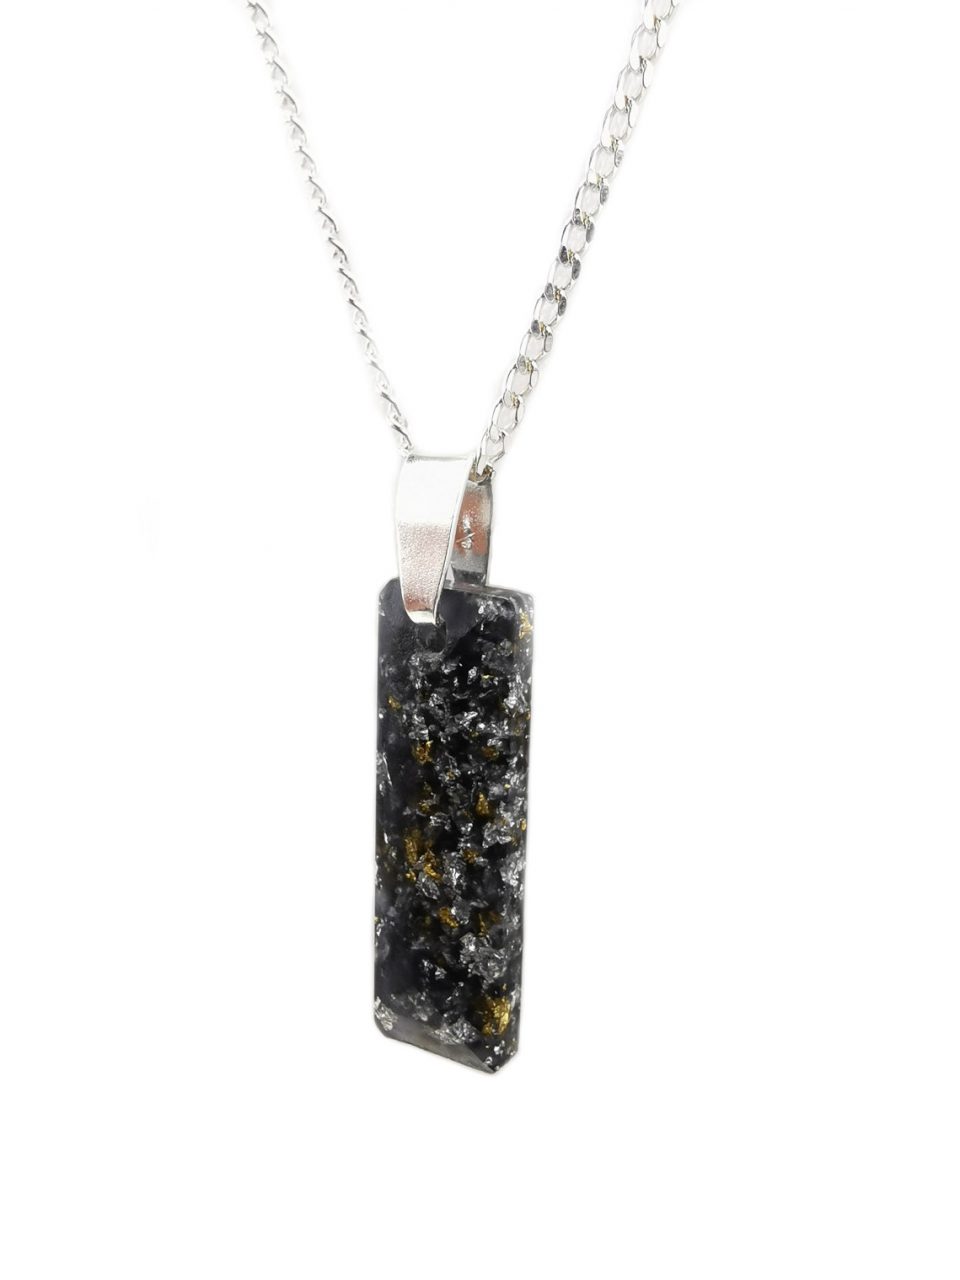 Small Black Baguette Orgonite Necklace by OrgoneVibes